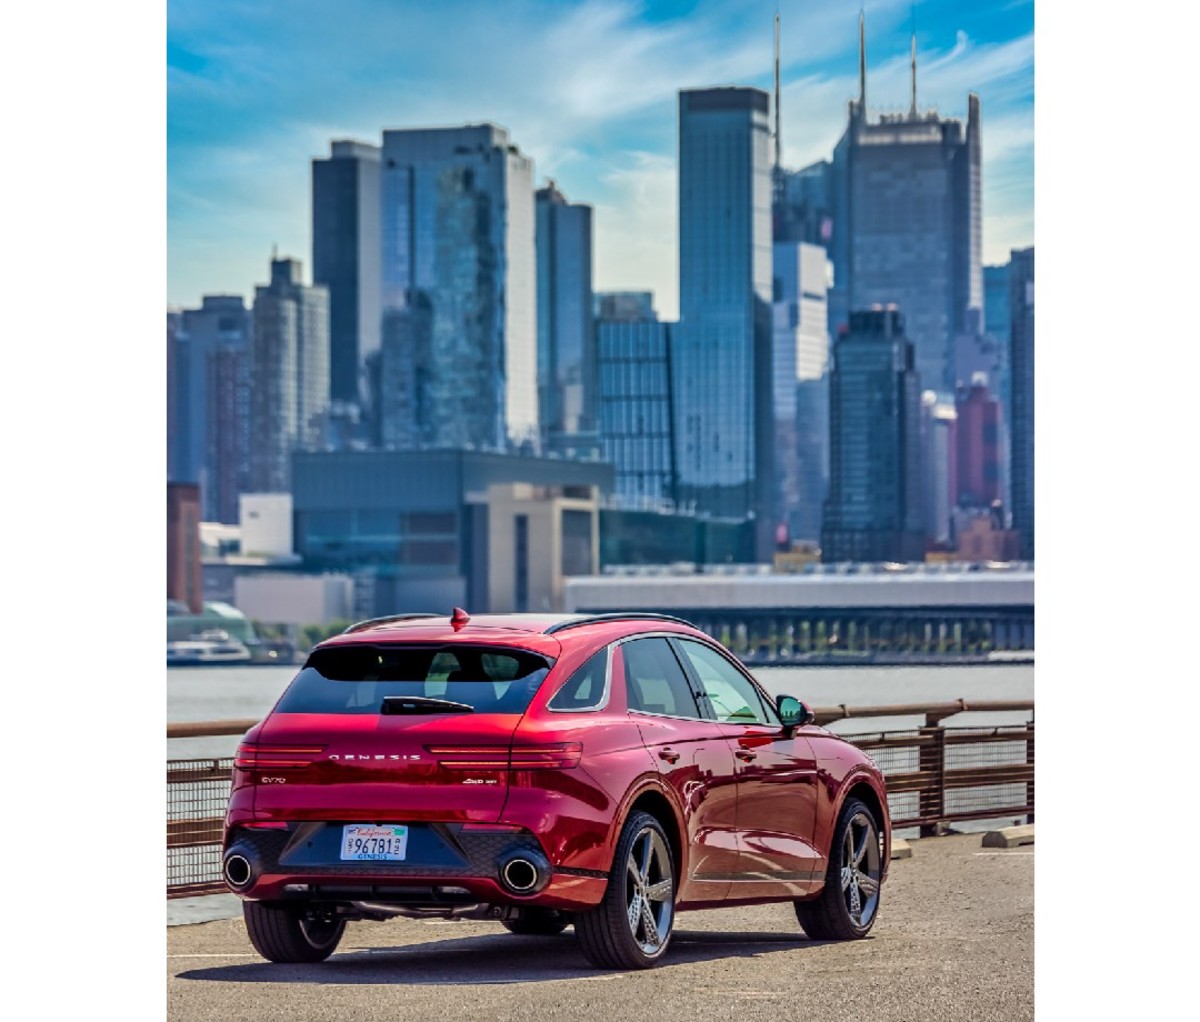 Genesis GV70 Sport in front of the New York City skyline